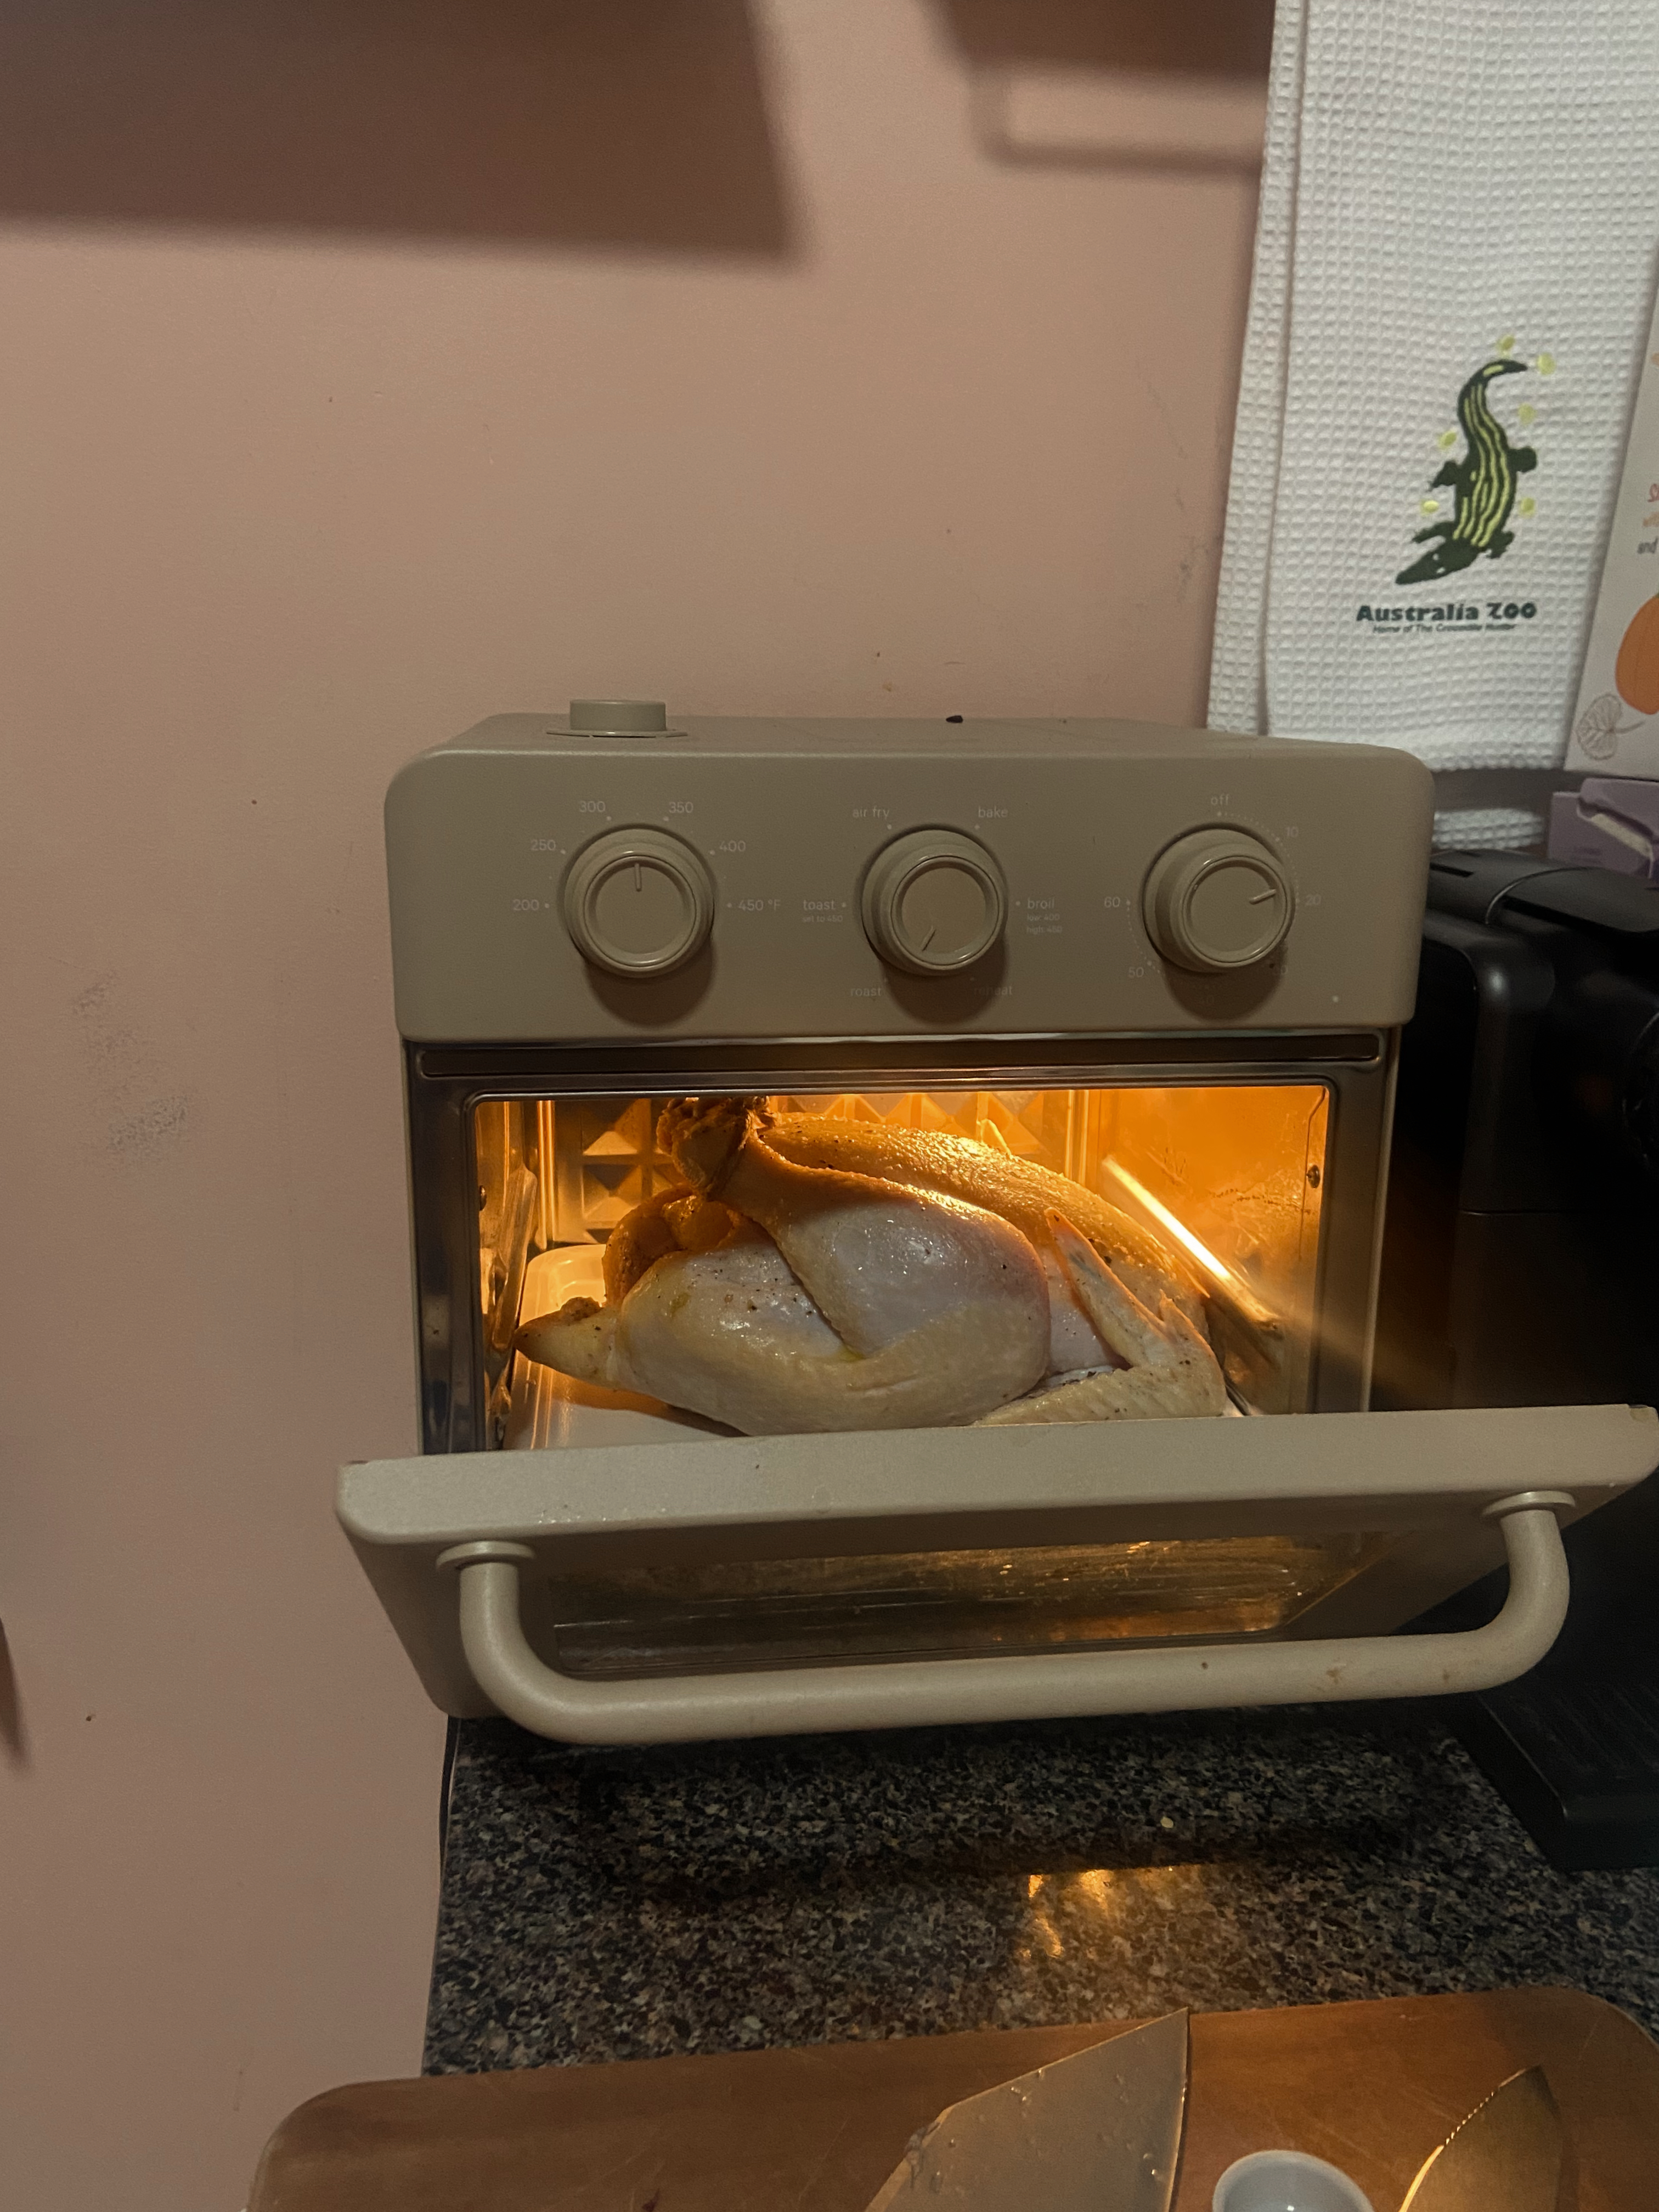 Our Place Wonder Oven Review — Jazz Leaf